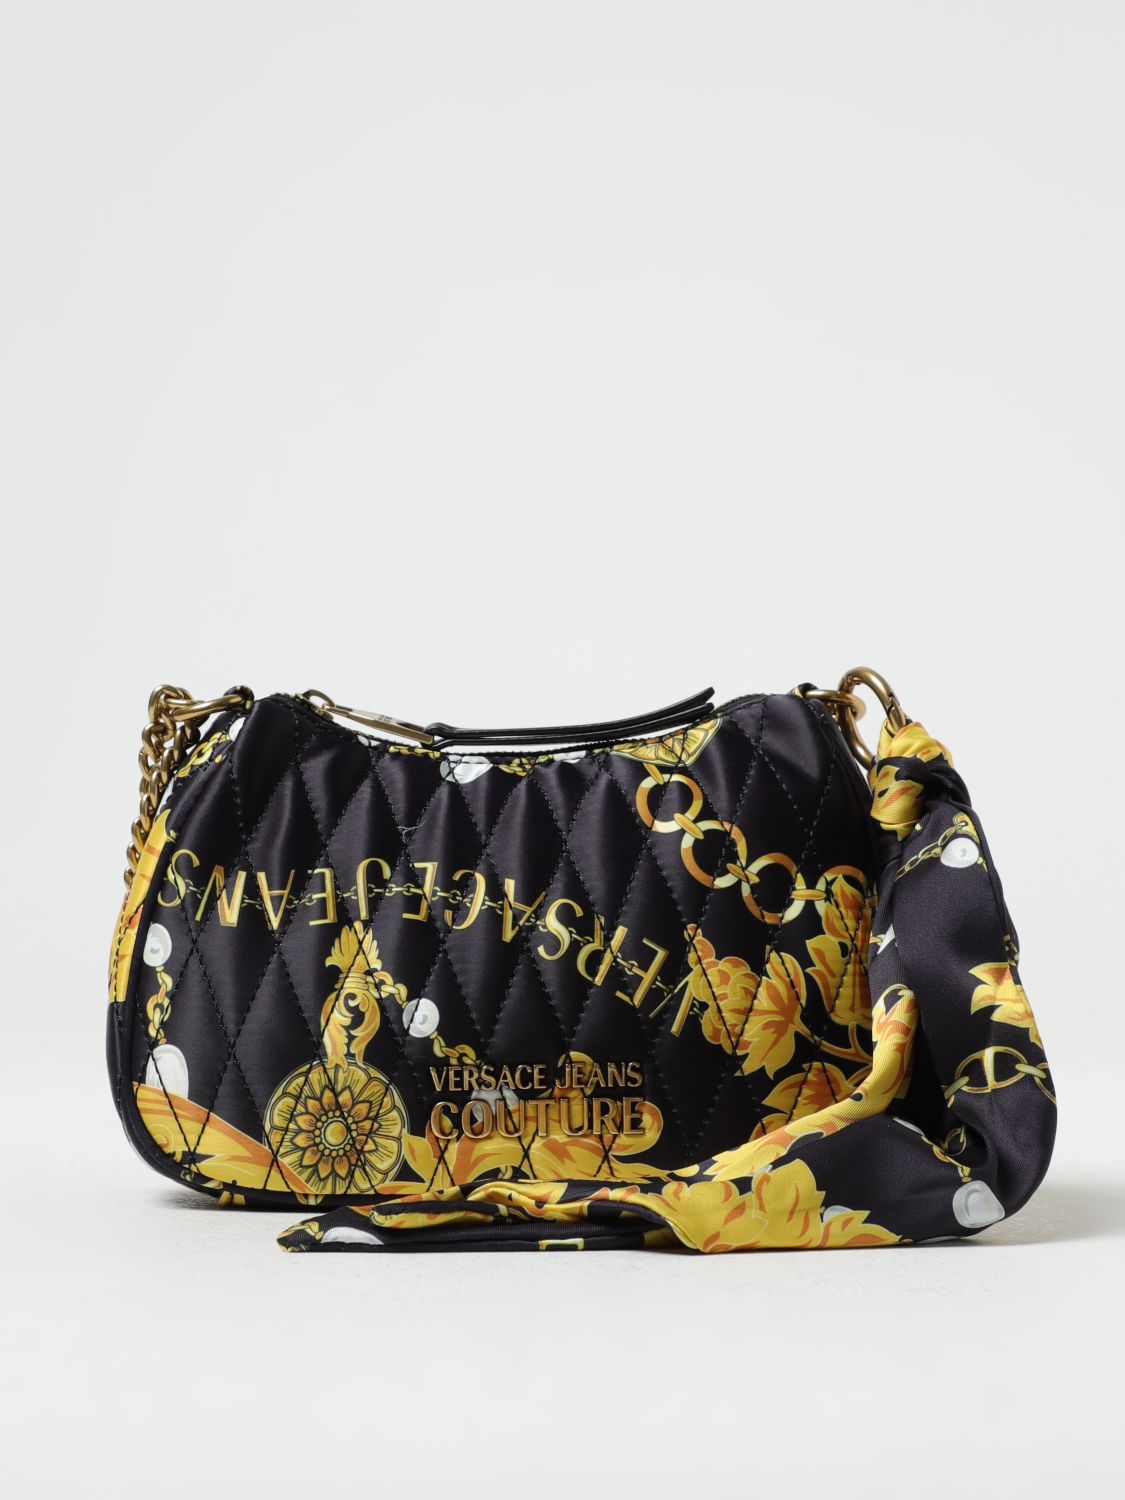 Versace Jeans Couture Mini Couture I Shoulder Bag in Black